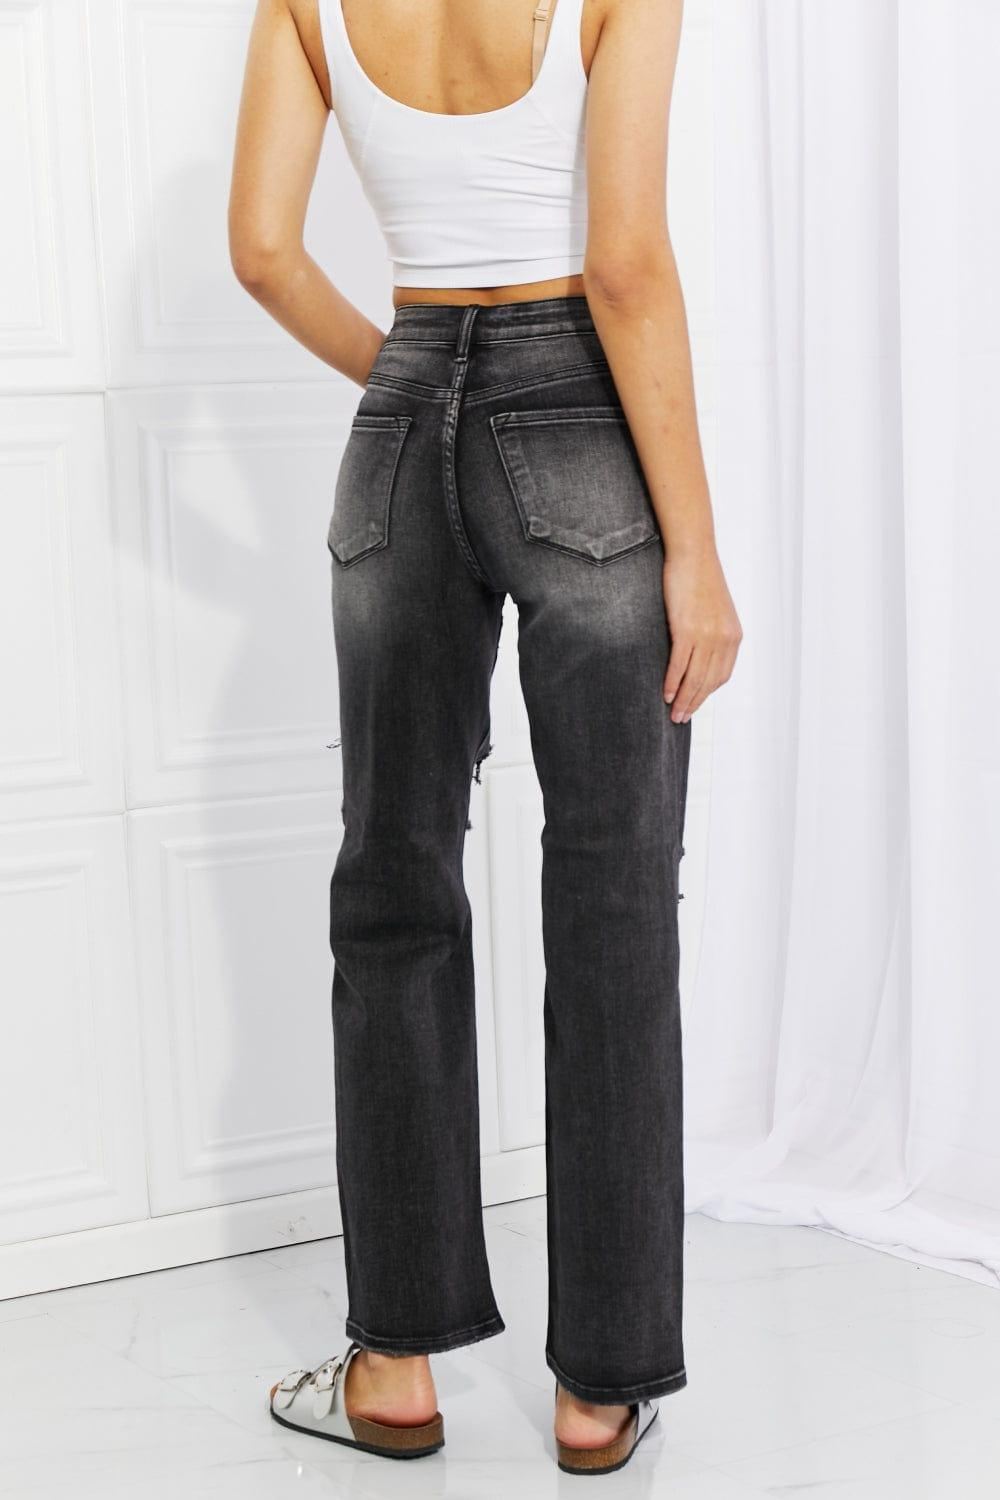 RISEN - Lois Distressed Loose Fit Jeans - Inspired Eye Boutique